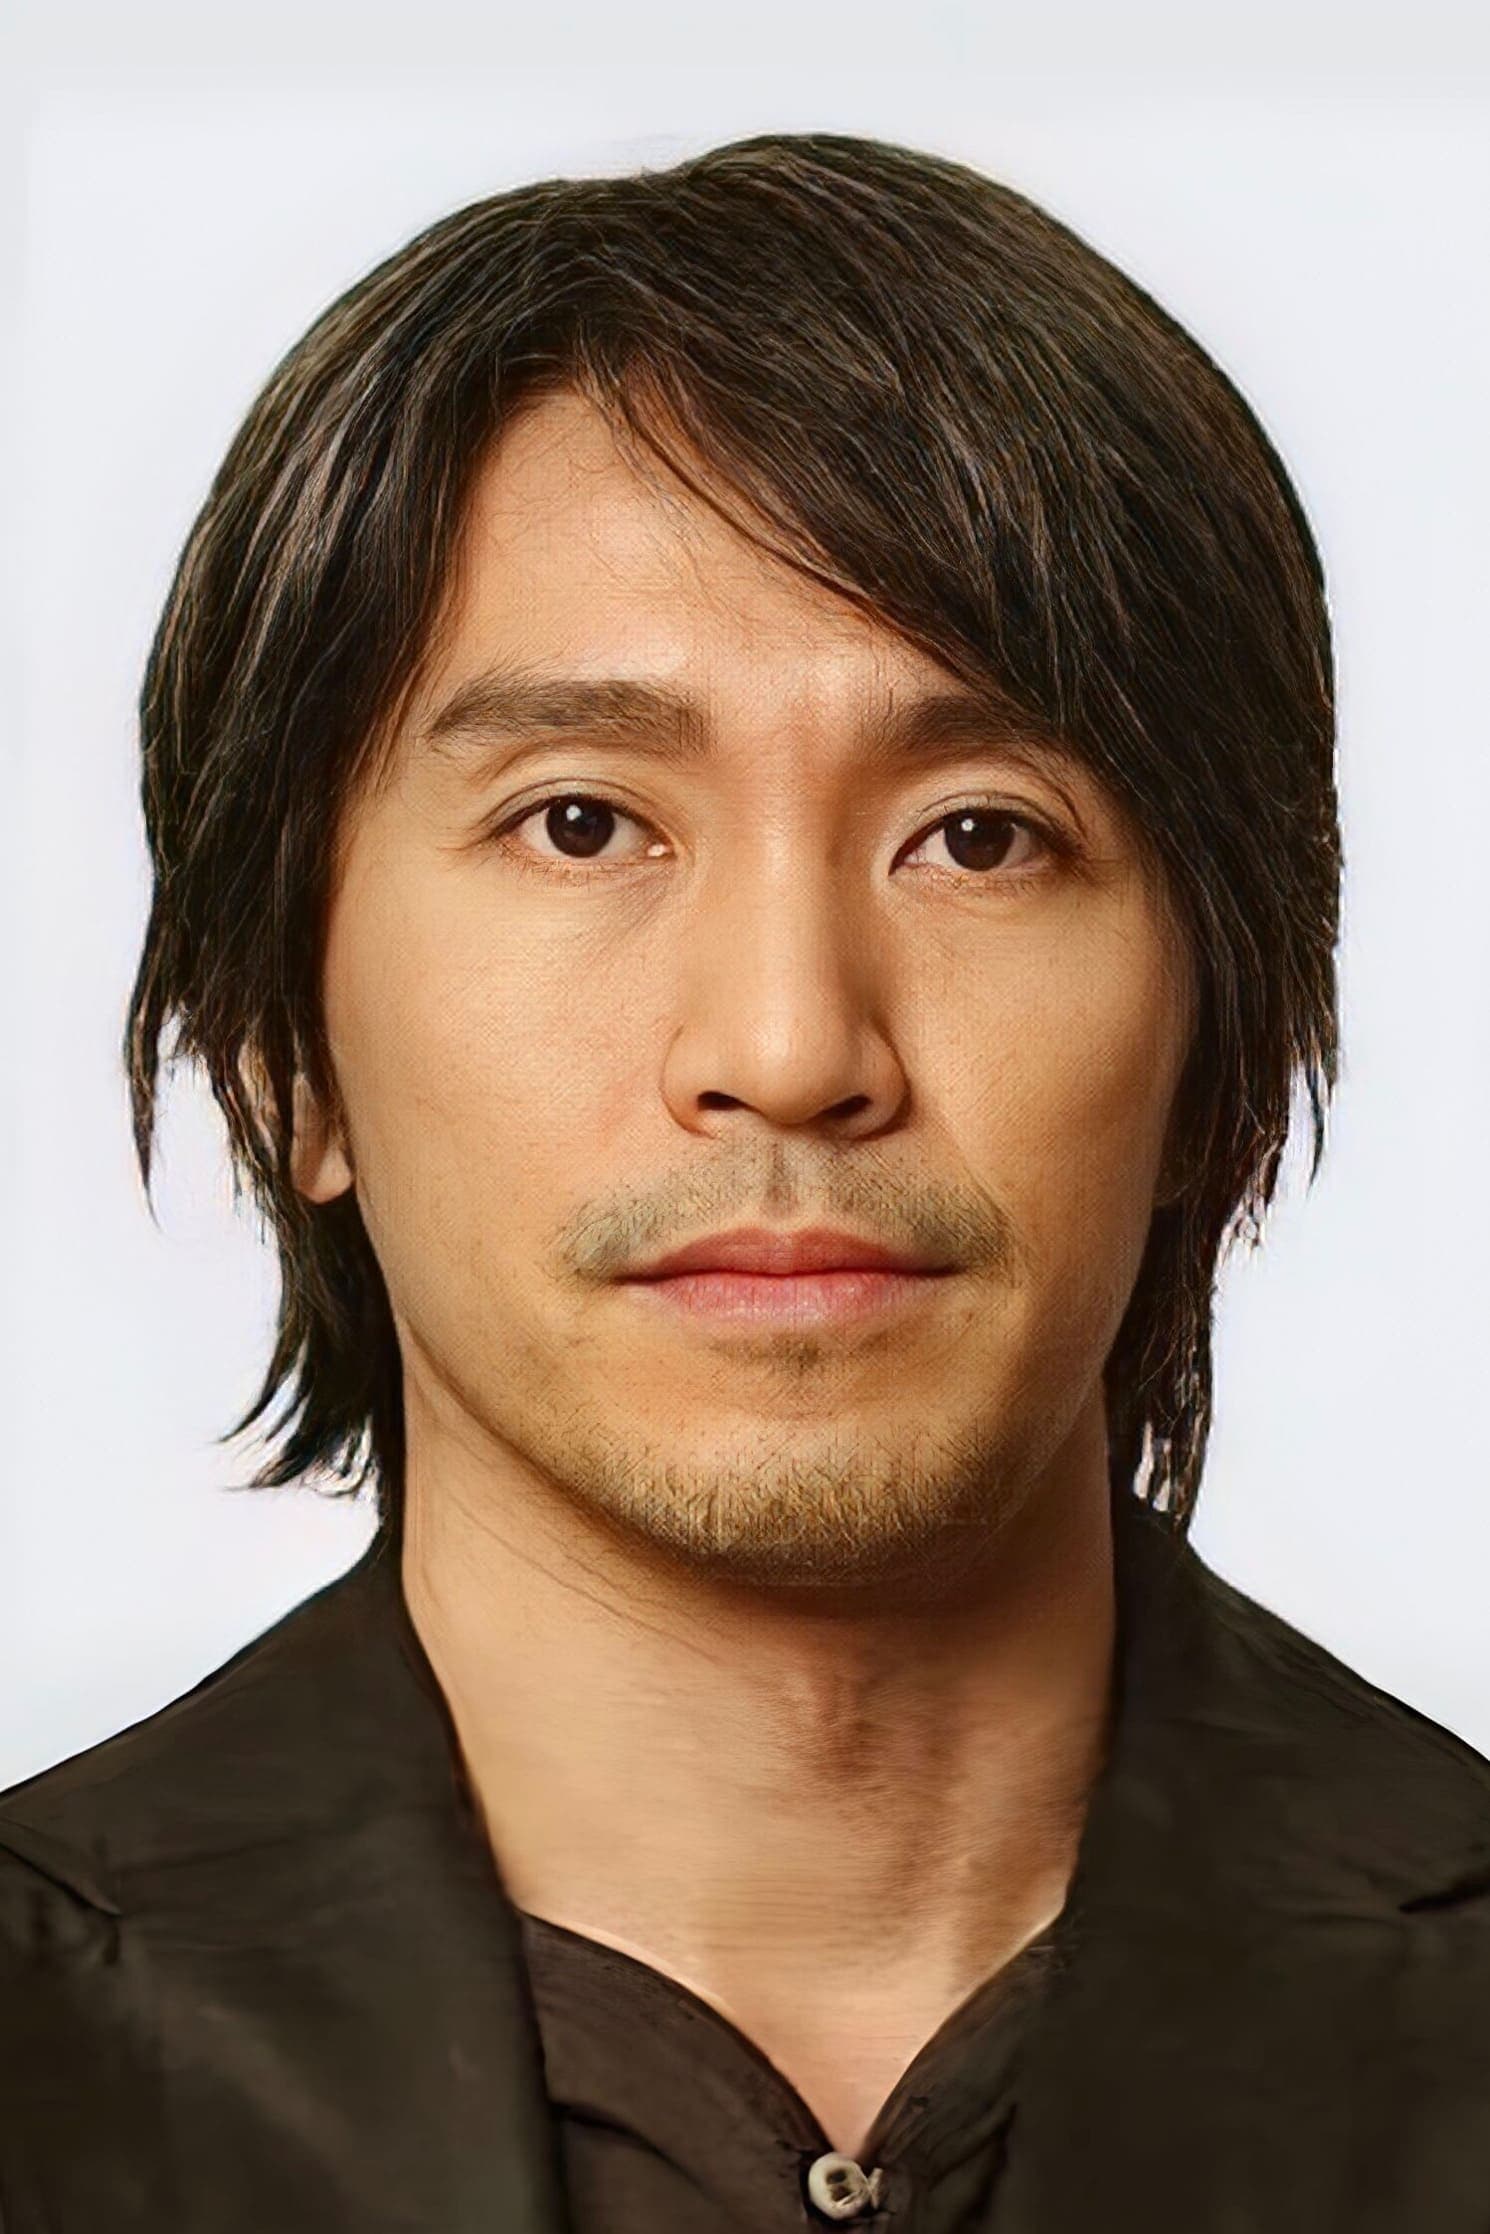 Stephen Chow | Director